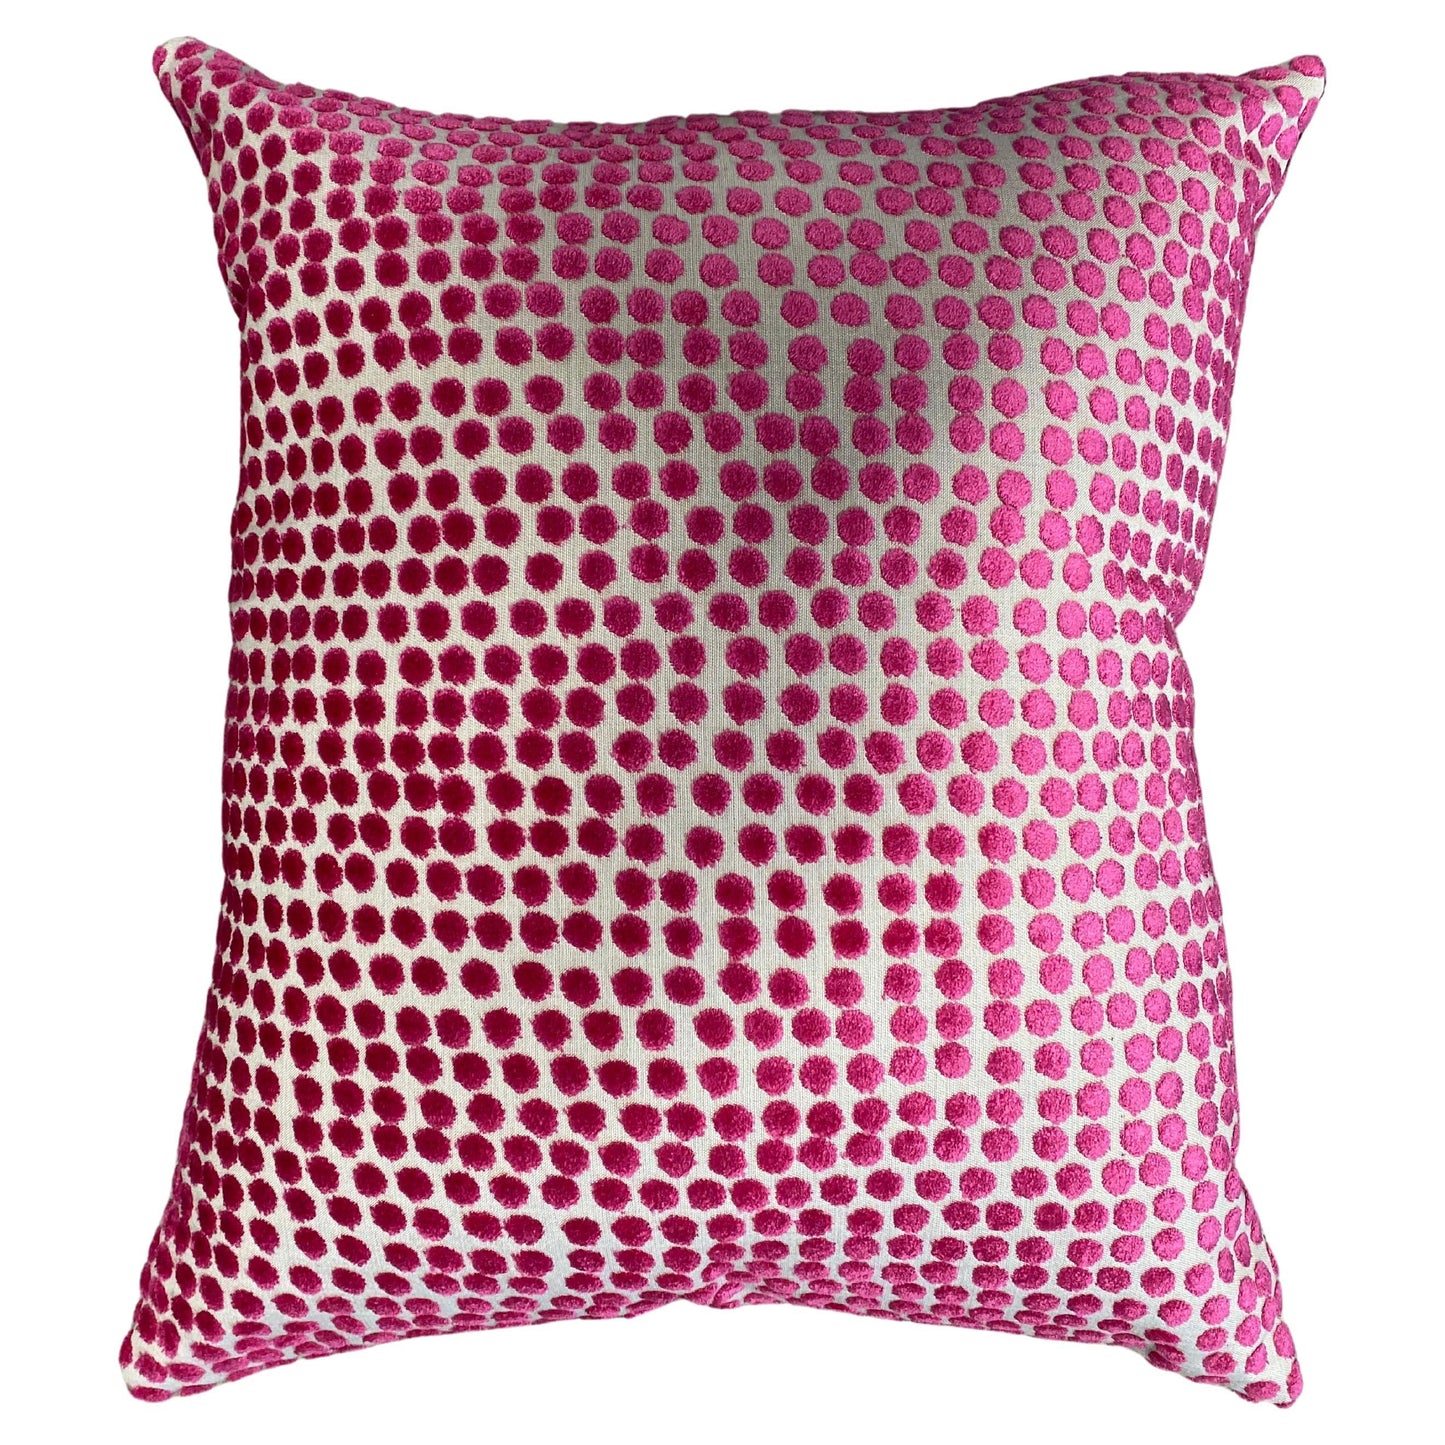 Pink Velvet Pillow with Accents and Polka Dot Back